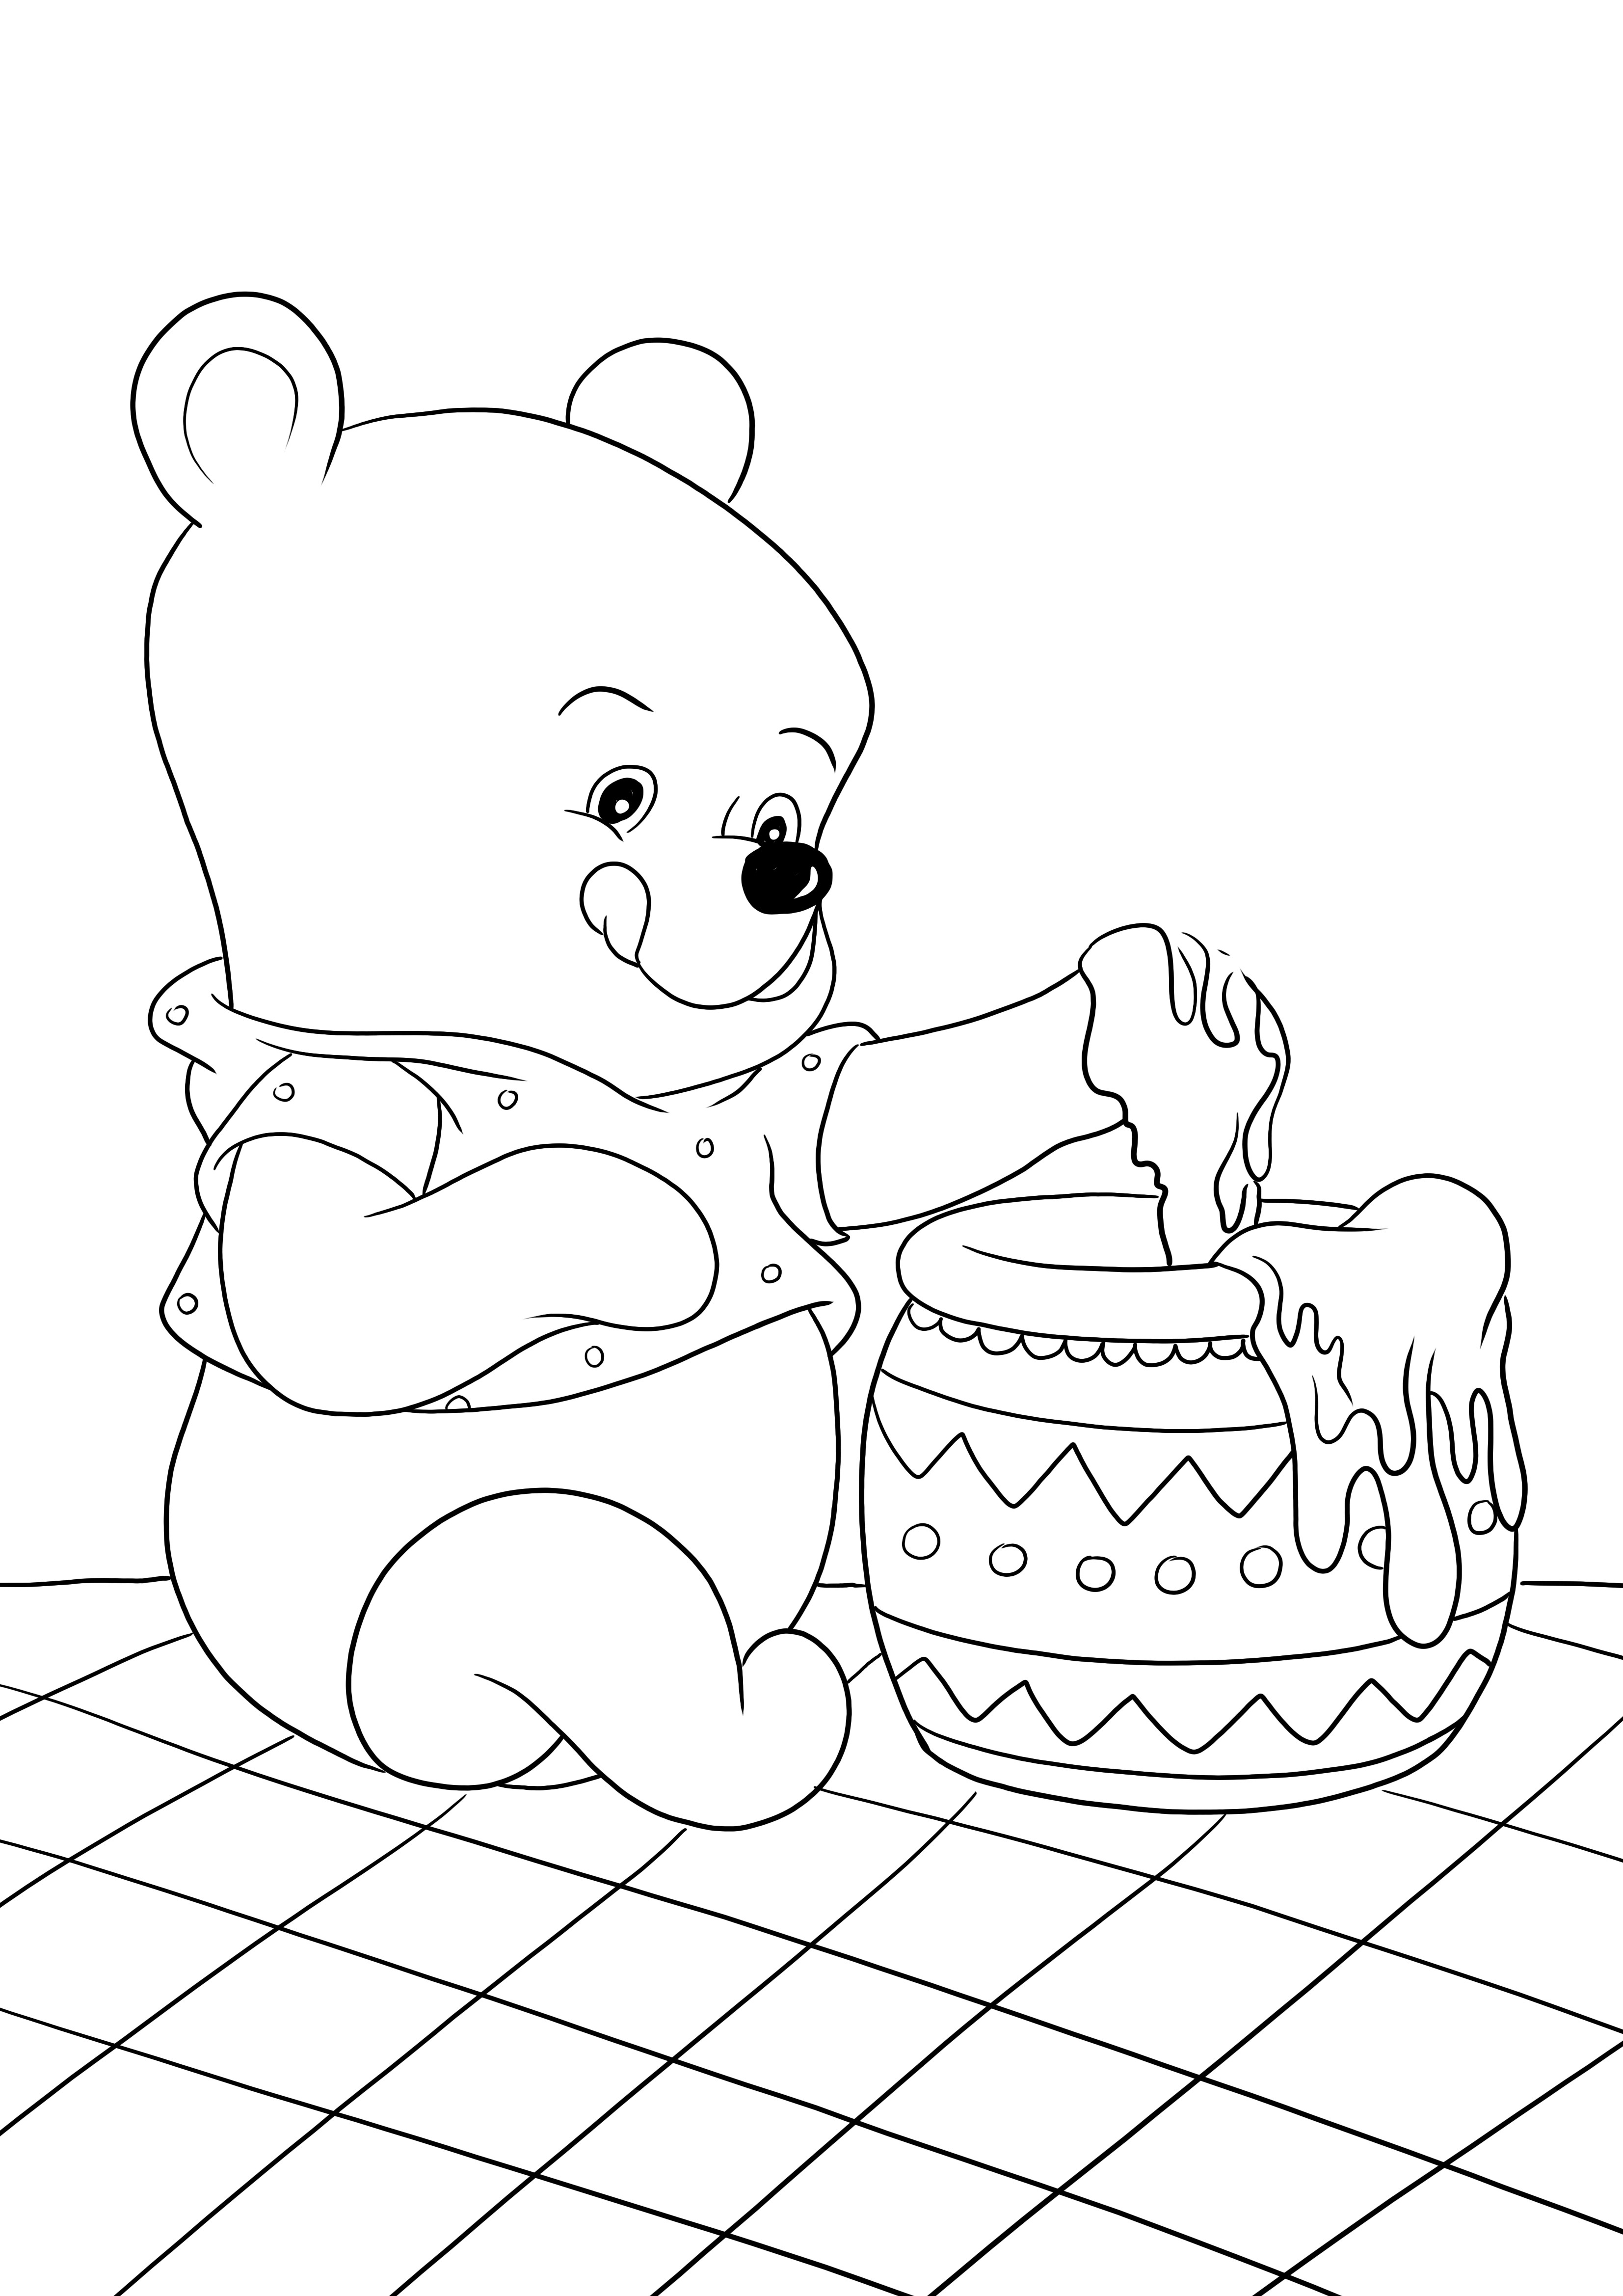 Winnie eating honey from a jar-free to color picture to print or save for later